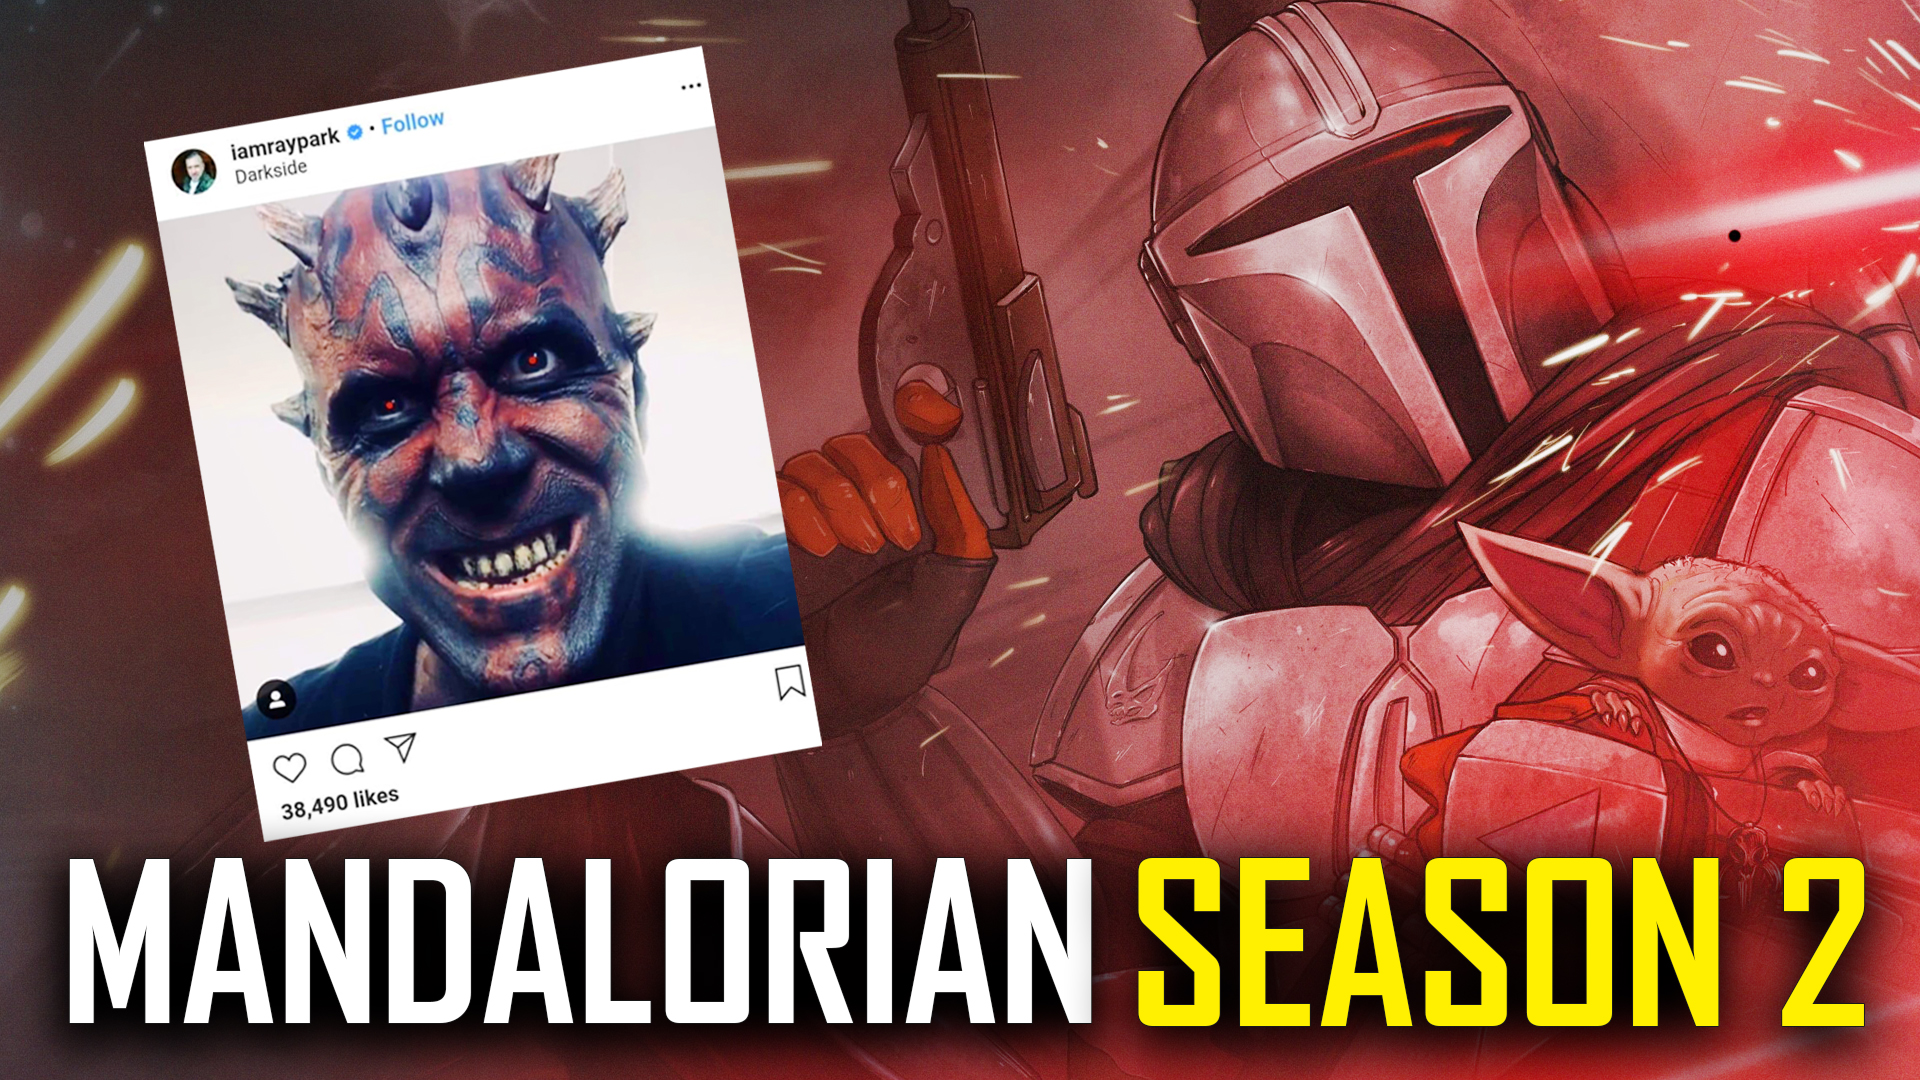 the mandalorian season 2 everything we know cast release date plot moff gideon darth maul skywalker character explained ending breakdown